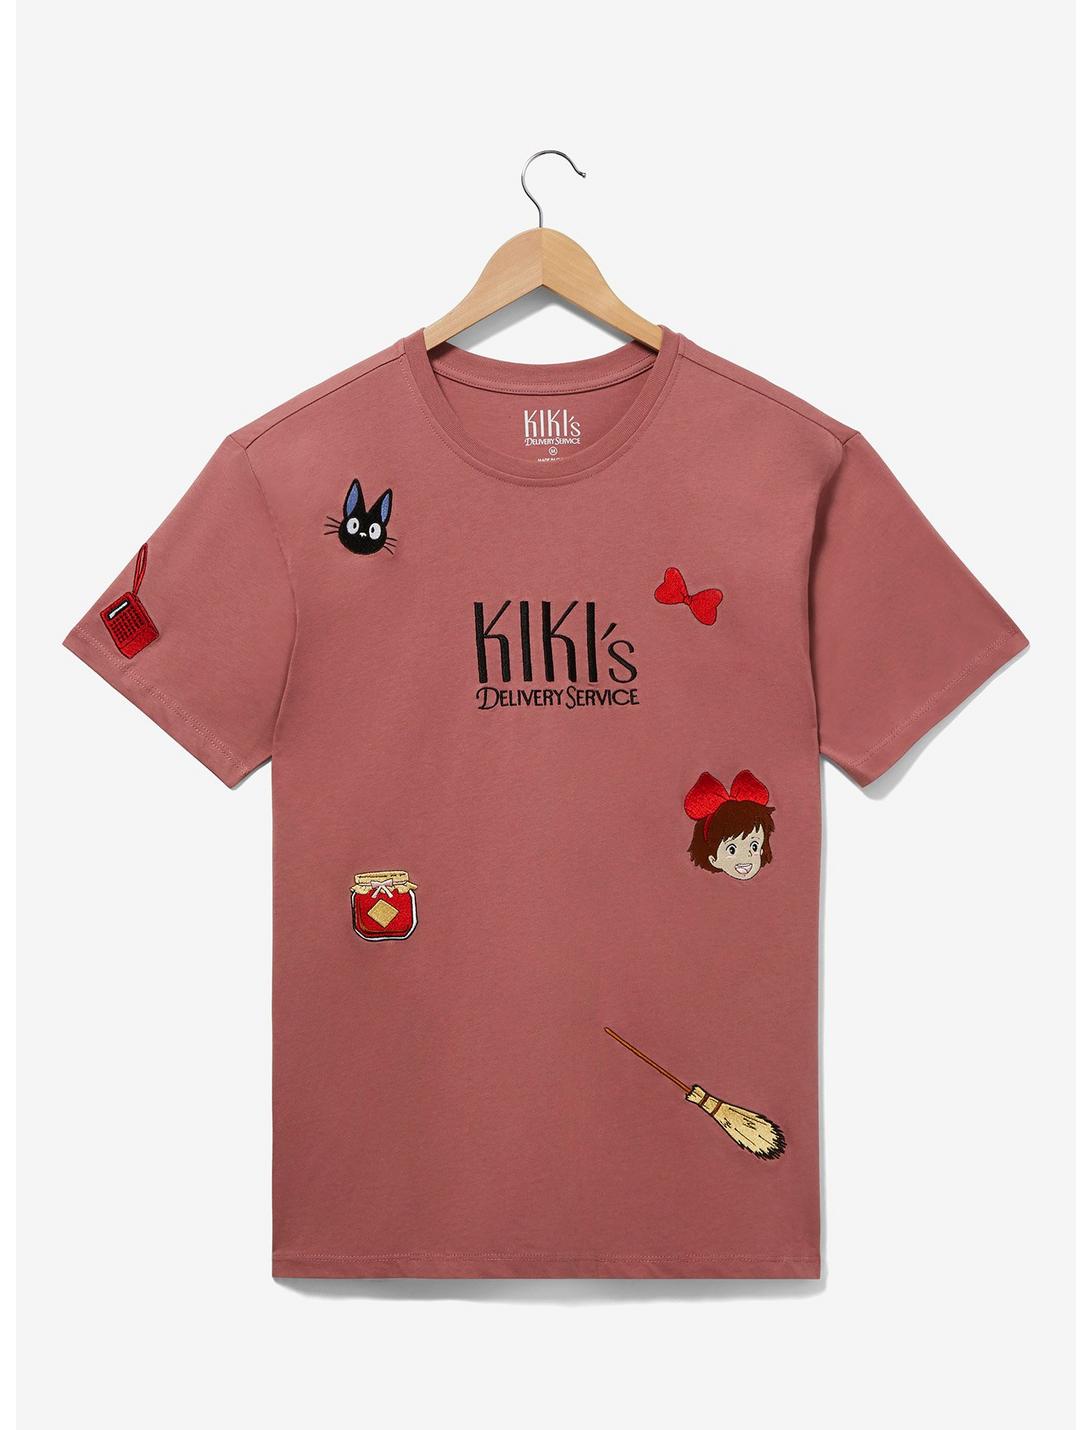 Studio Ghibli Kiki's Delivery Service Scattered Icons Embroidered T-Shirt - BoxLunch Exclusive, DARK RED, hi-res